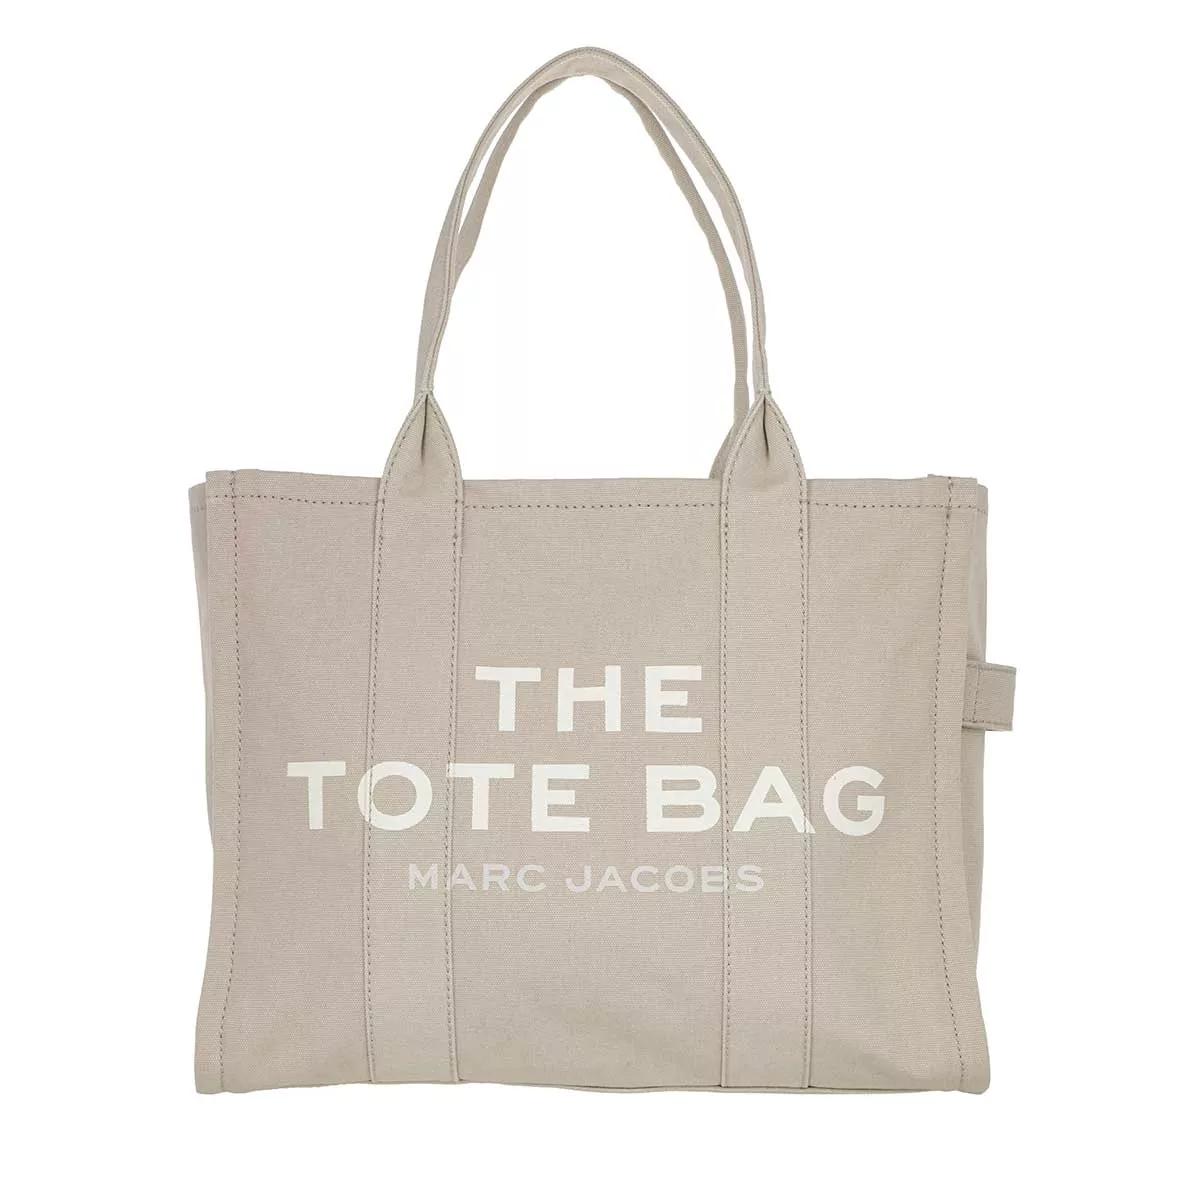 Marc Jacobs The Tote Bag Beige